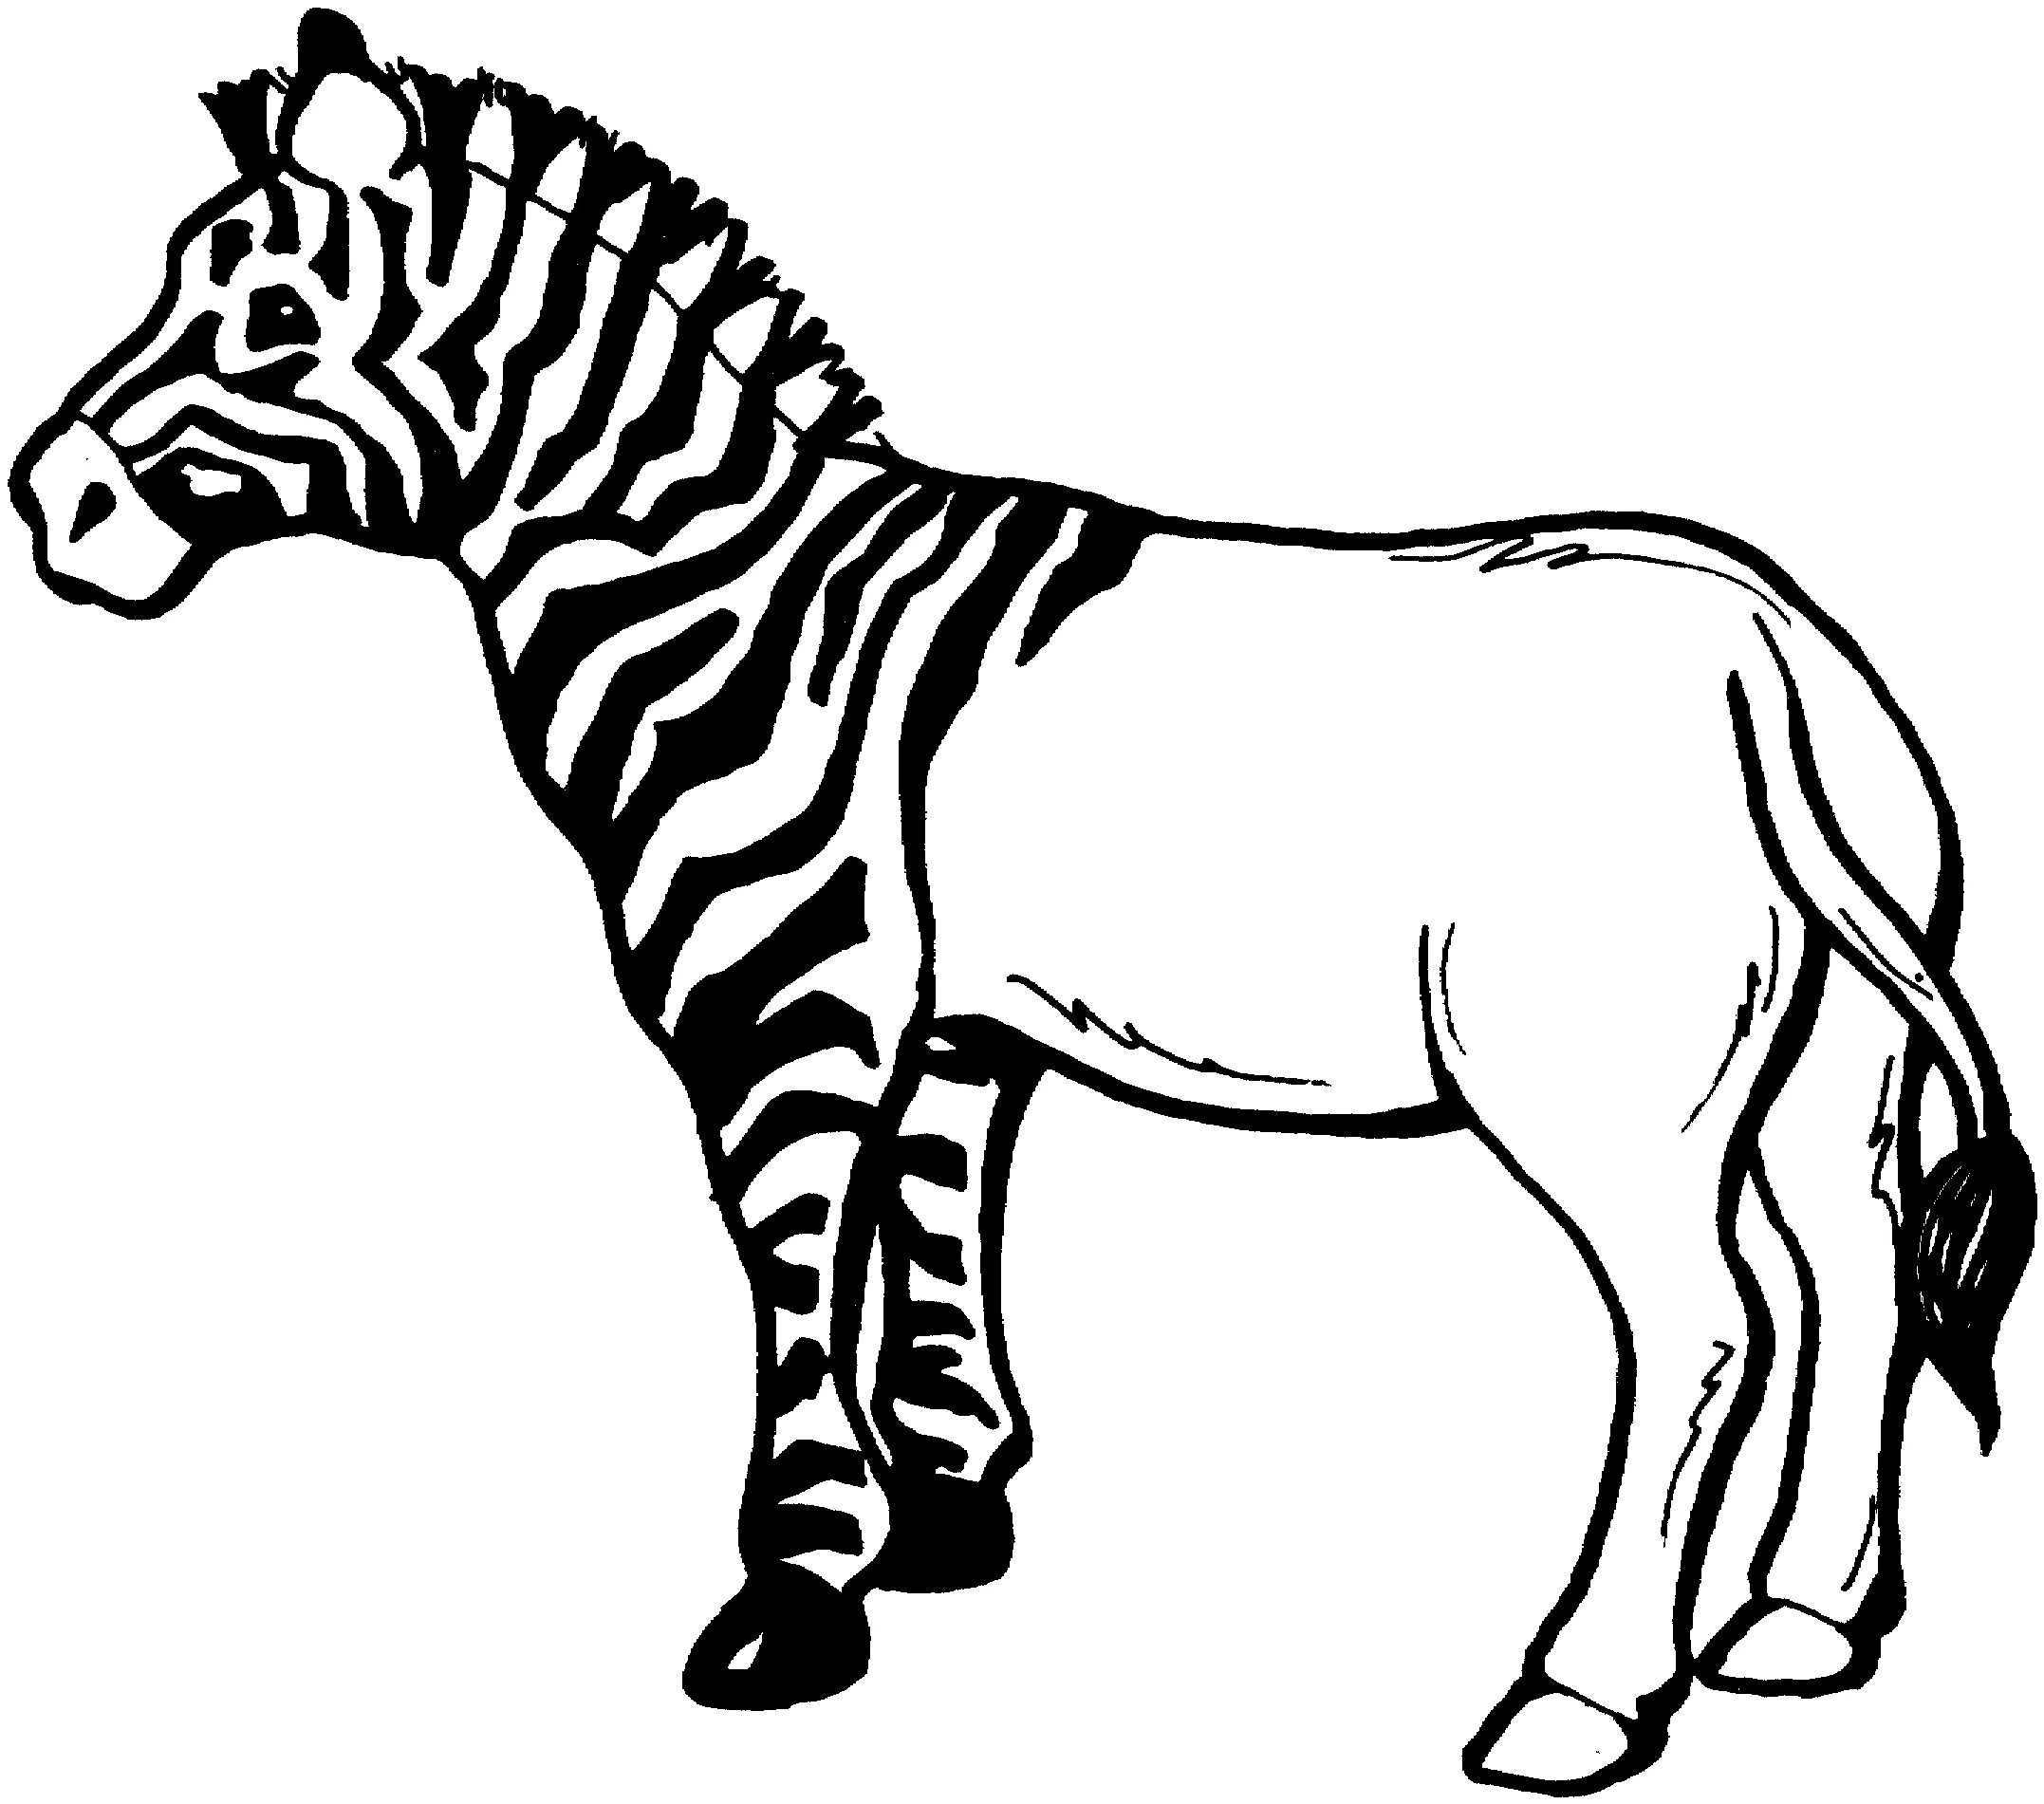 Blissful zebra coloring book for children 3-4 years old